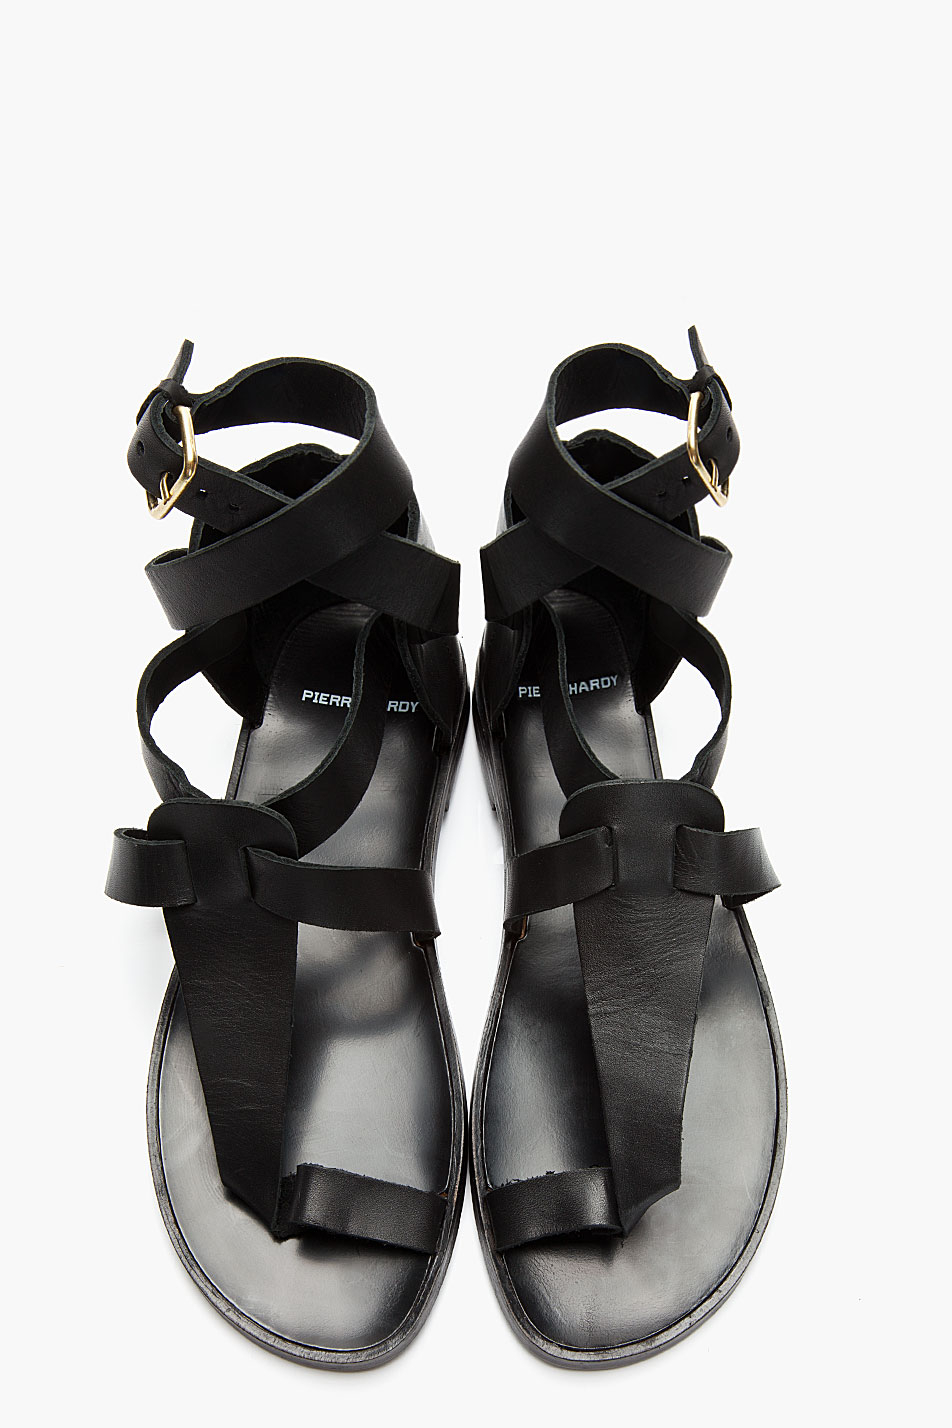 Lyst - Pierre Hardy Black Leather Dy02 Gladiator Sandals in Black for Men